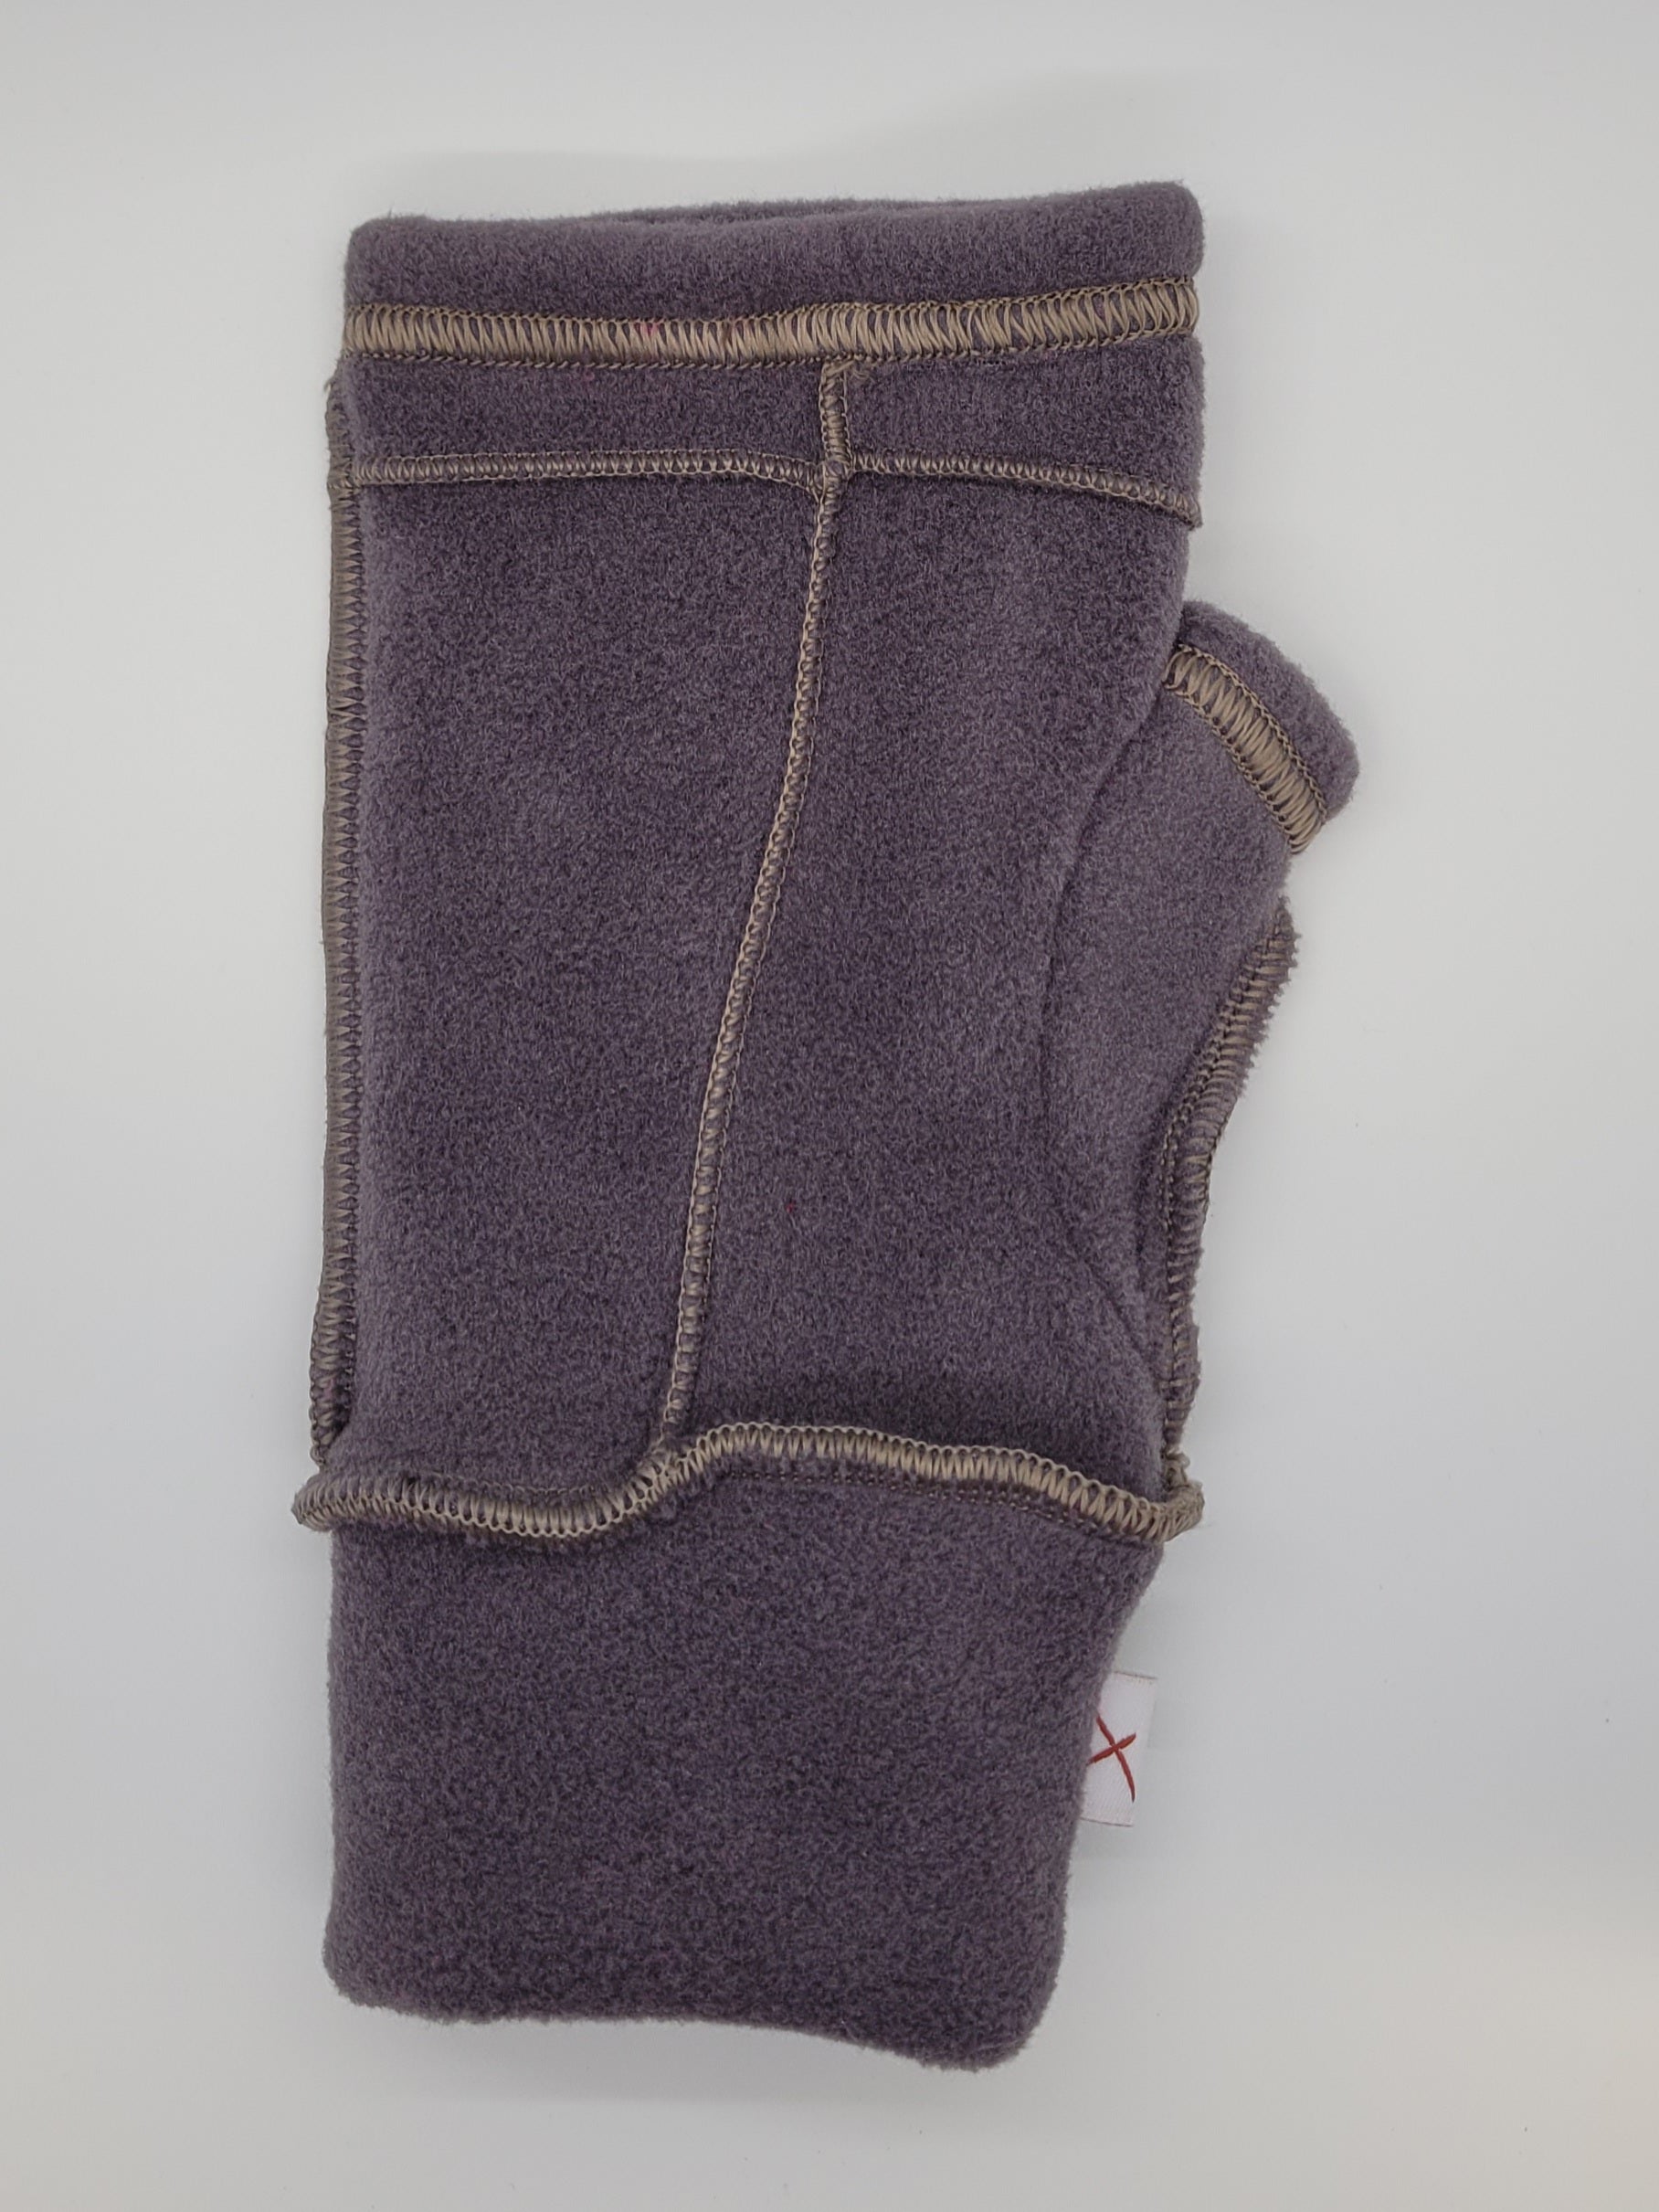 Cuffed Xmittens: Gray with Silver Thread